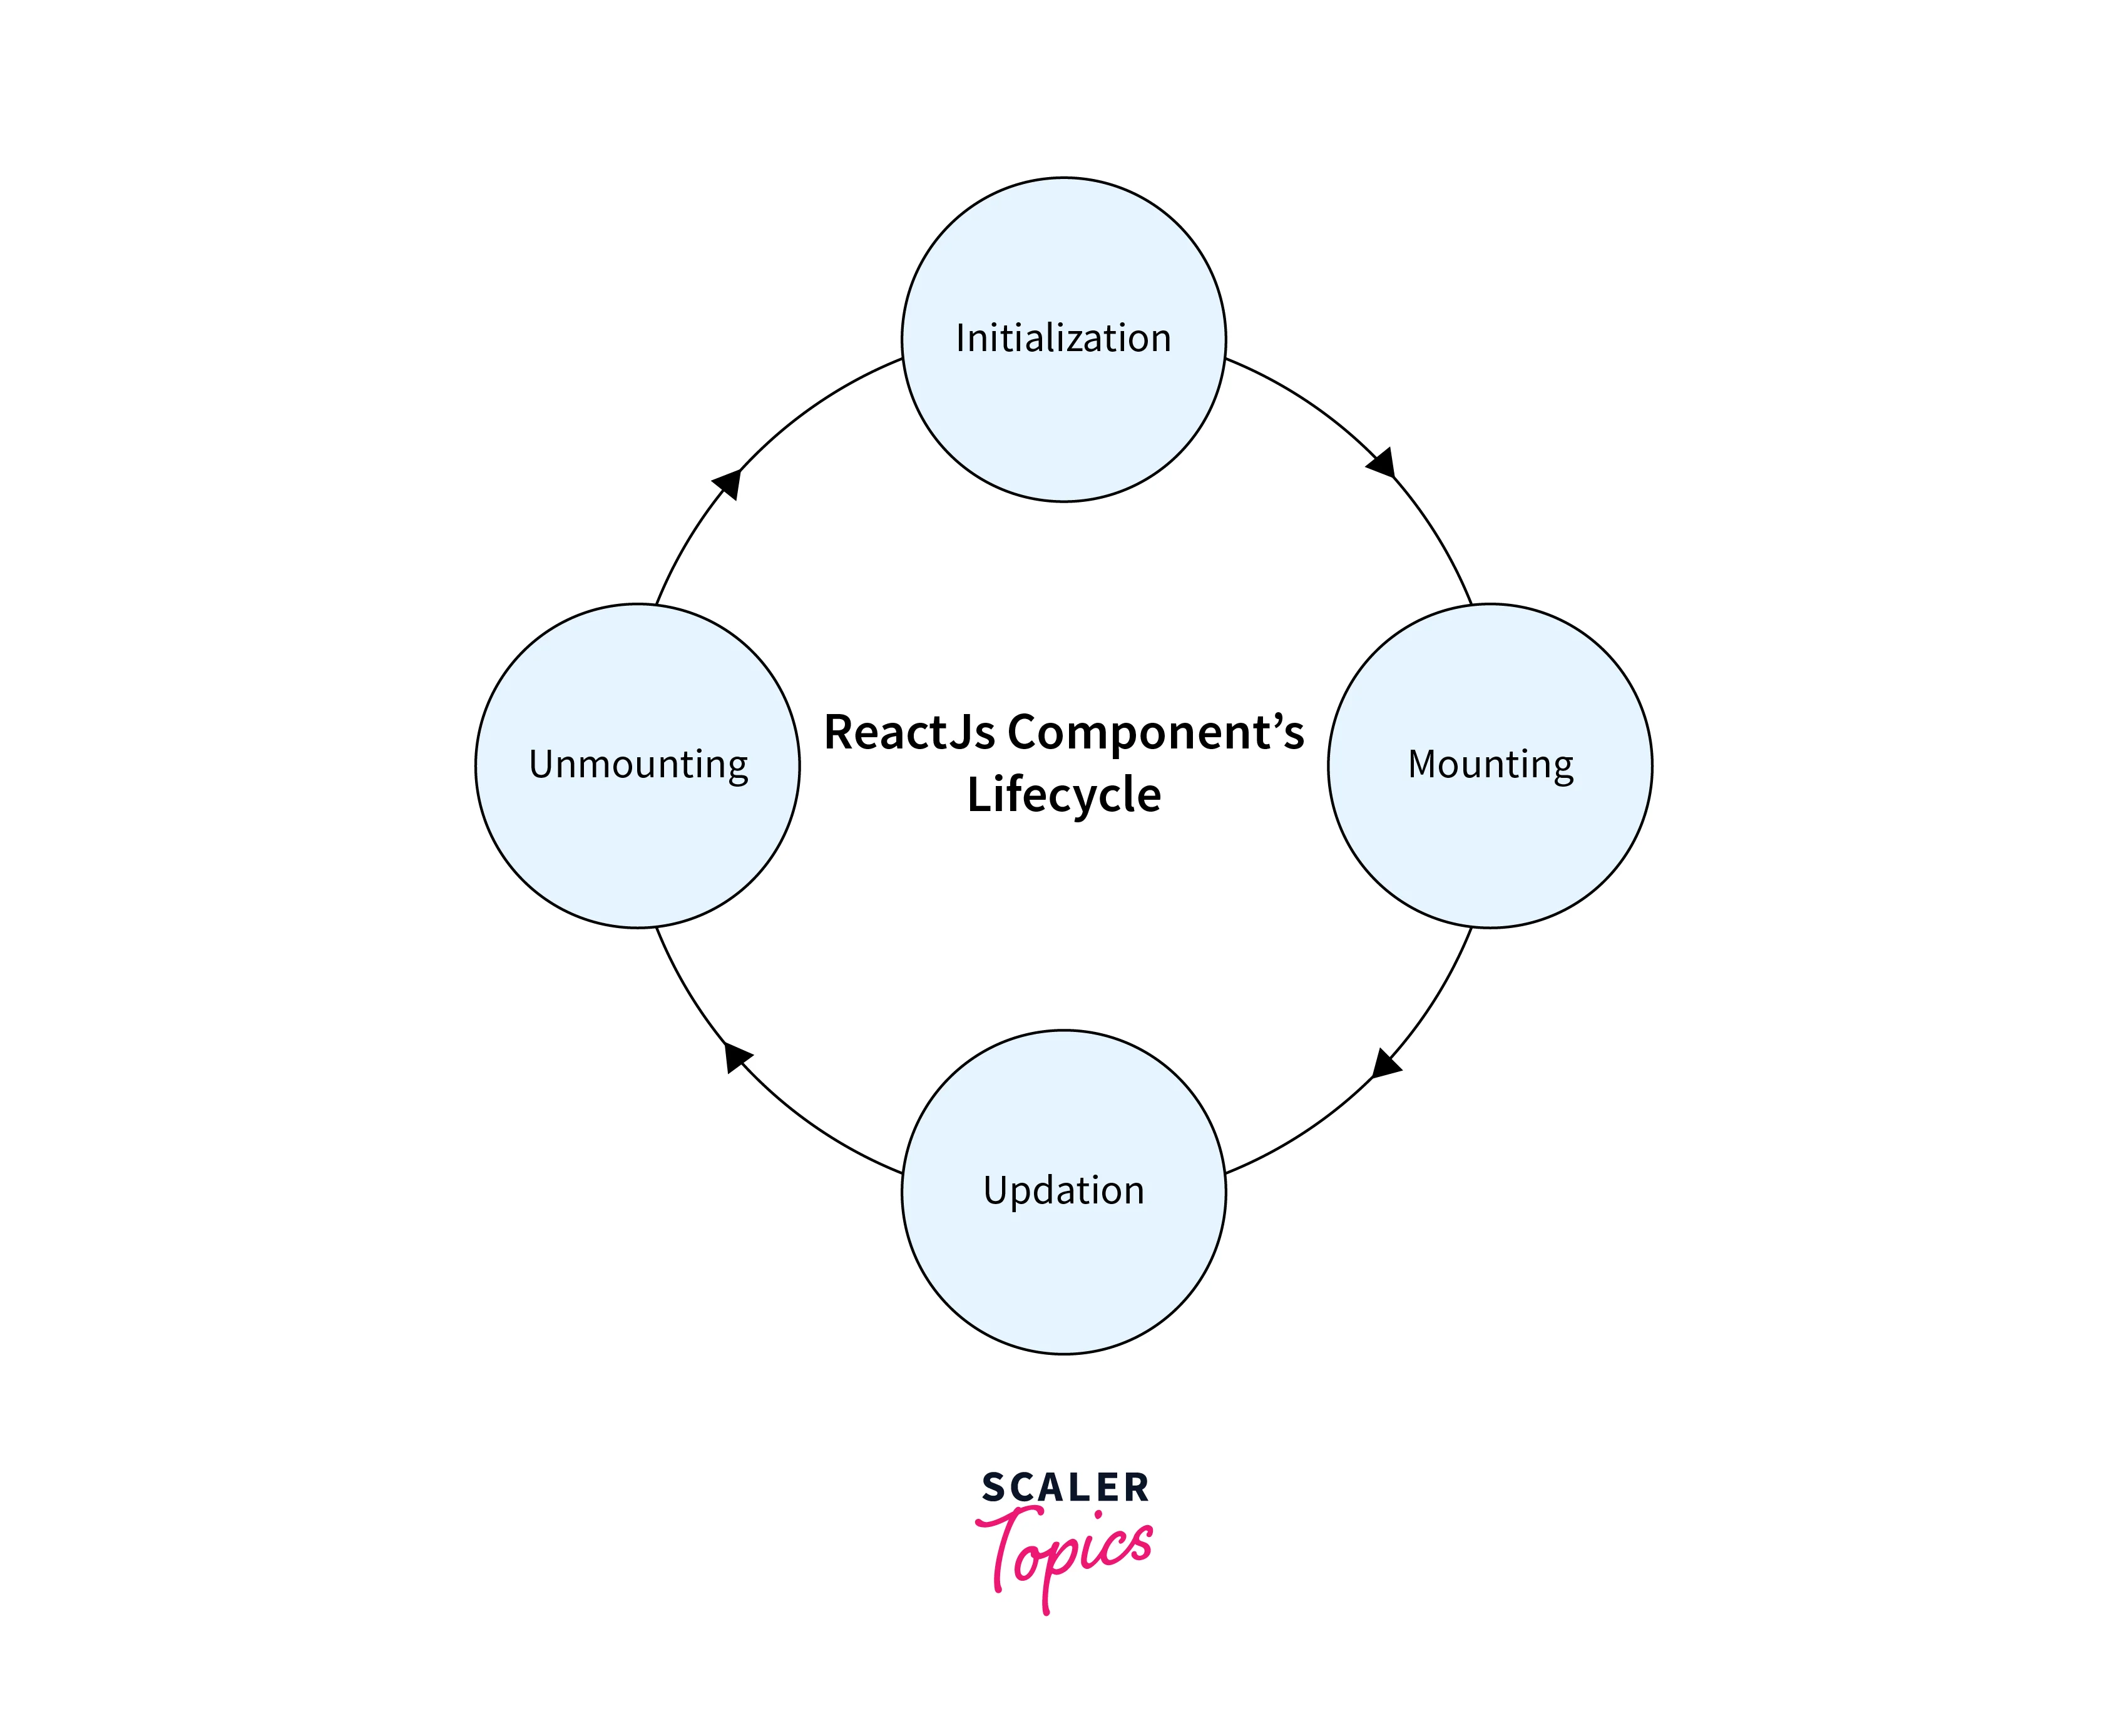 reactjs components lifecycle